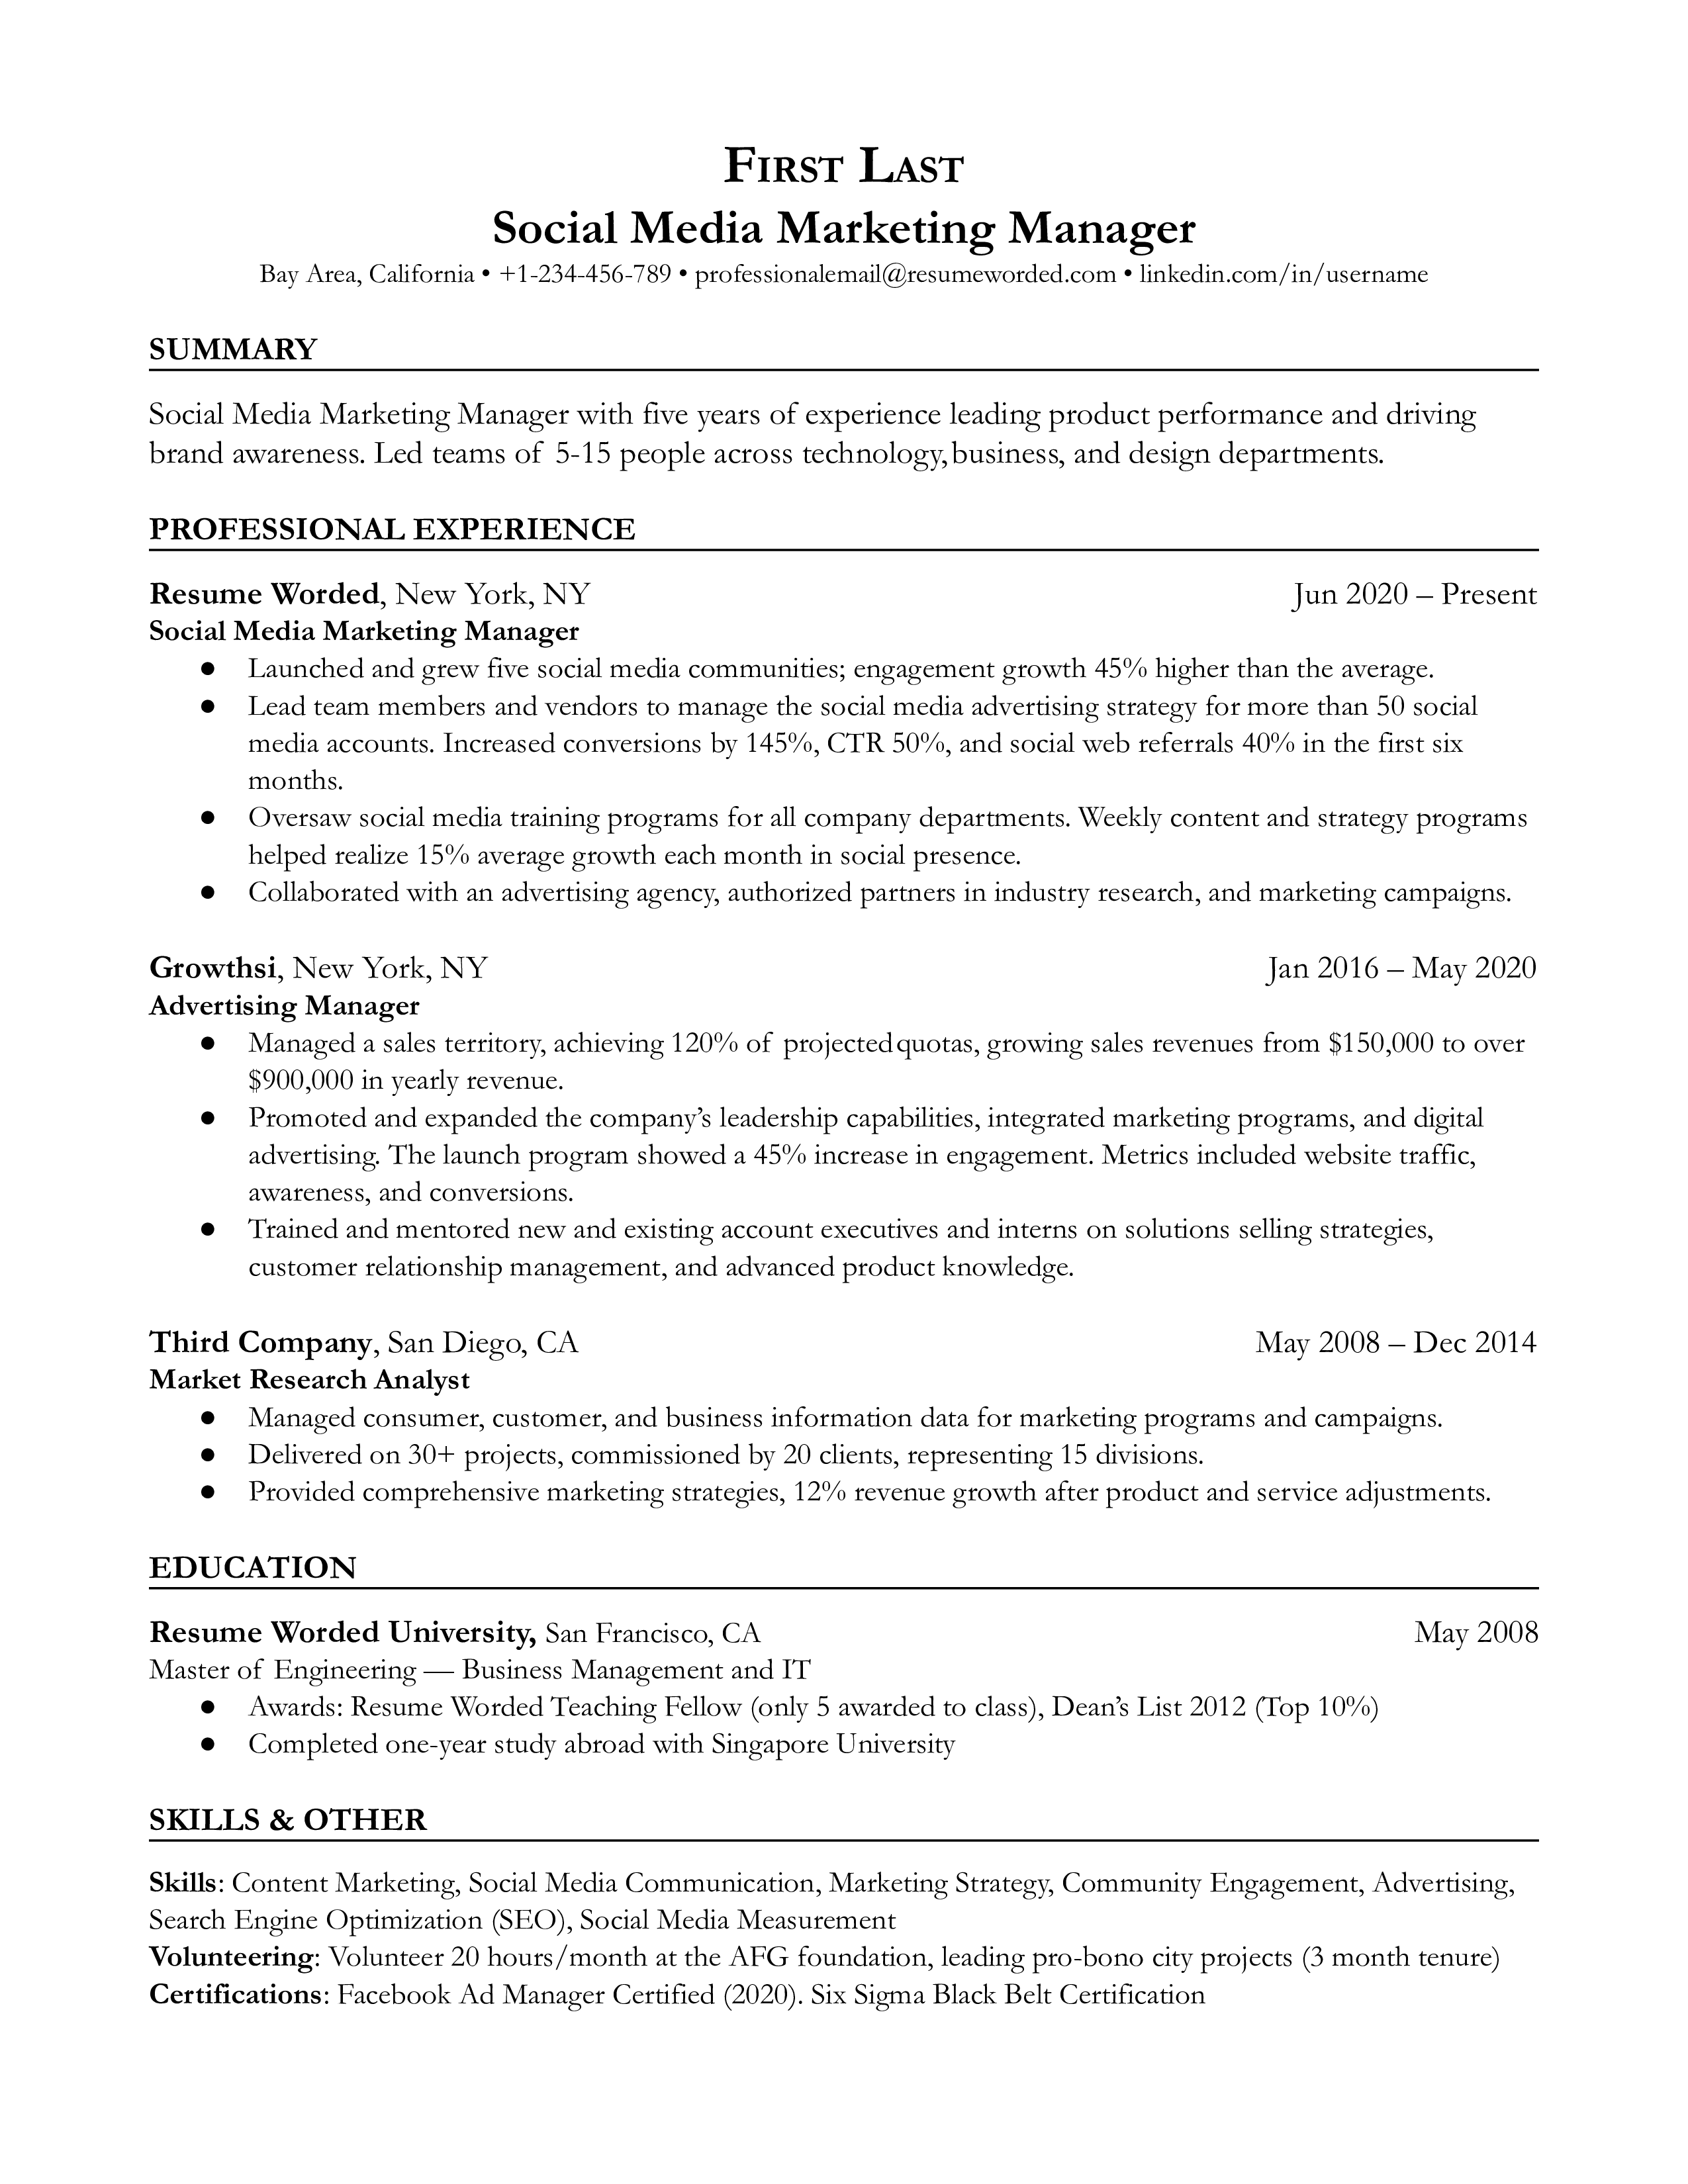 Social media marketing manager with bullet points, strong action verbs, and measurable results